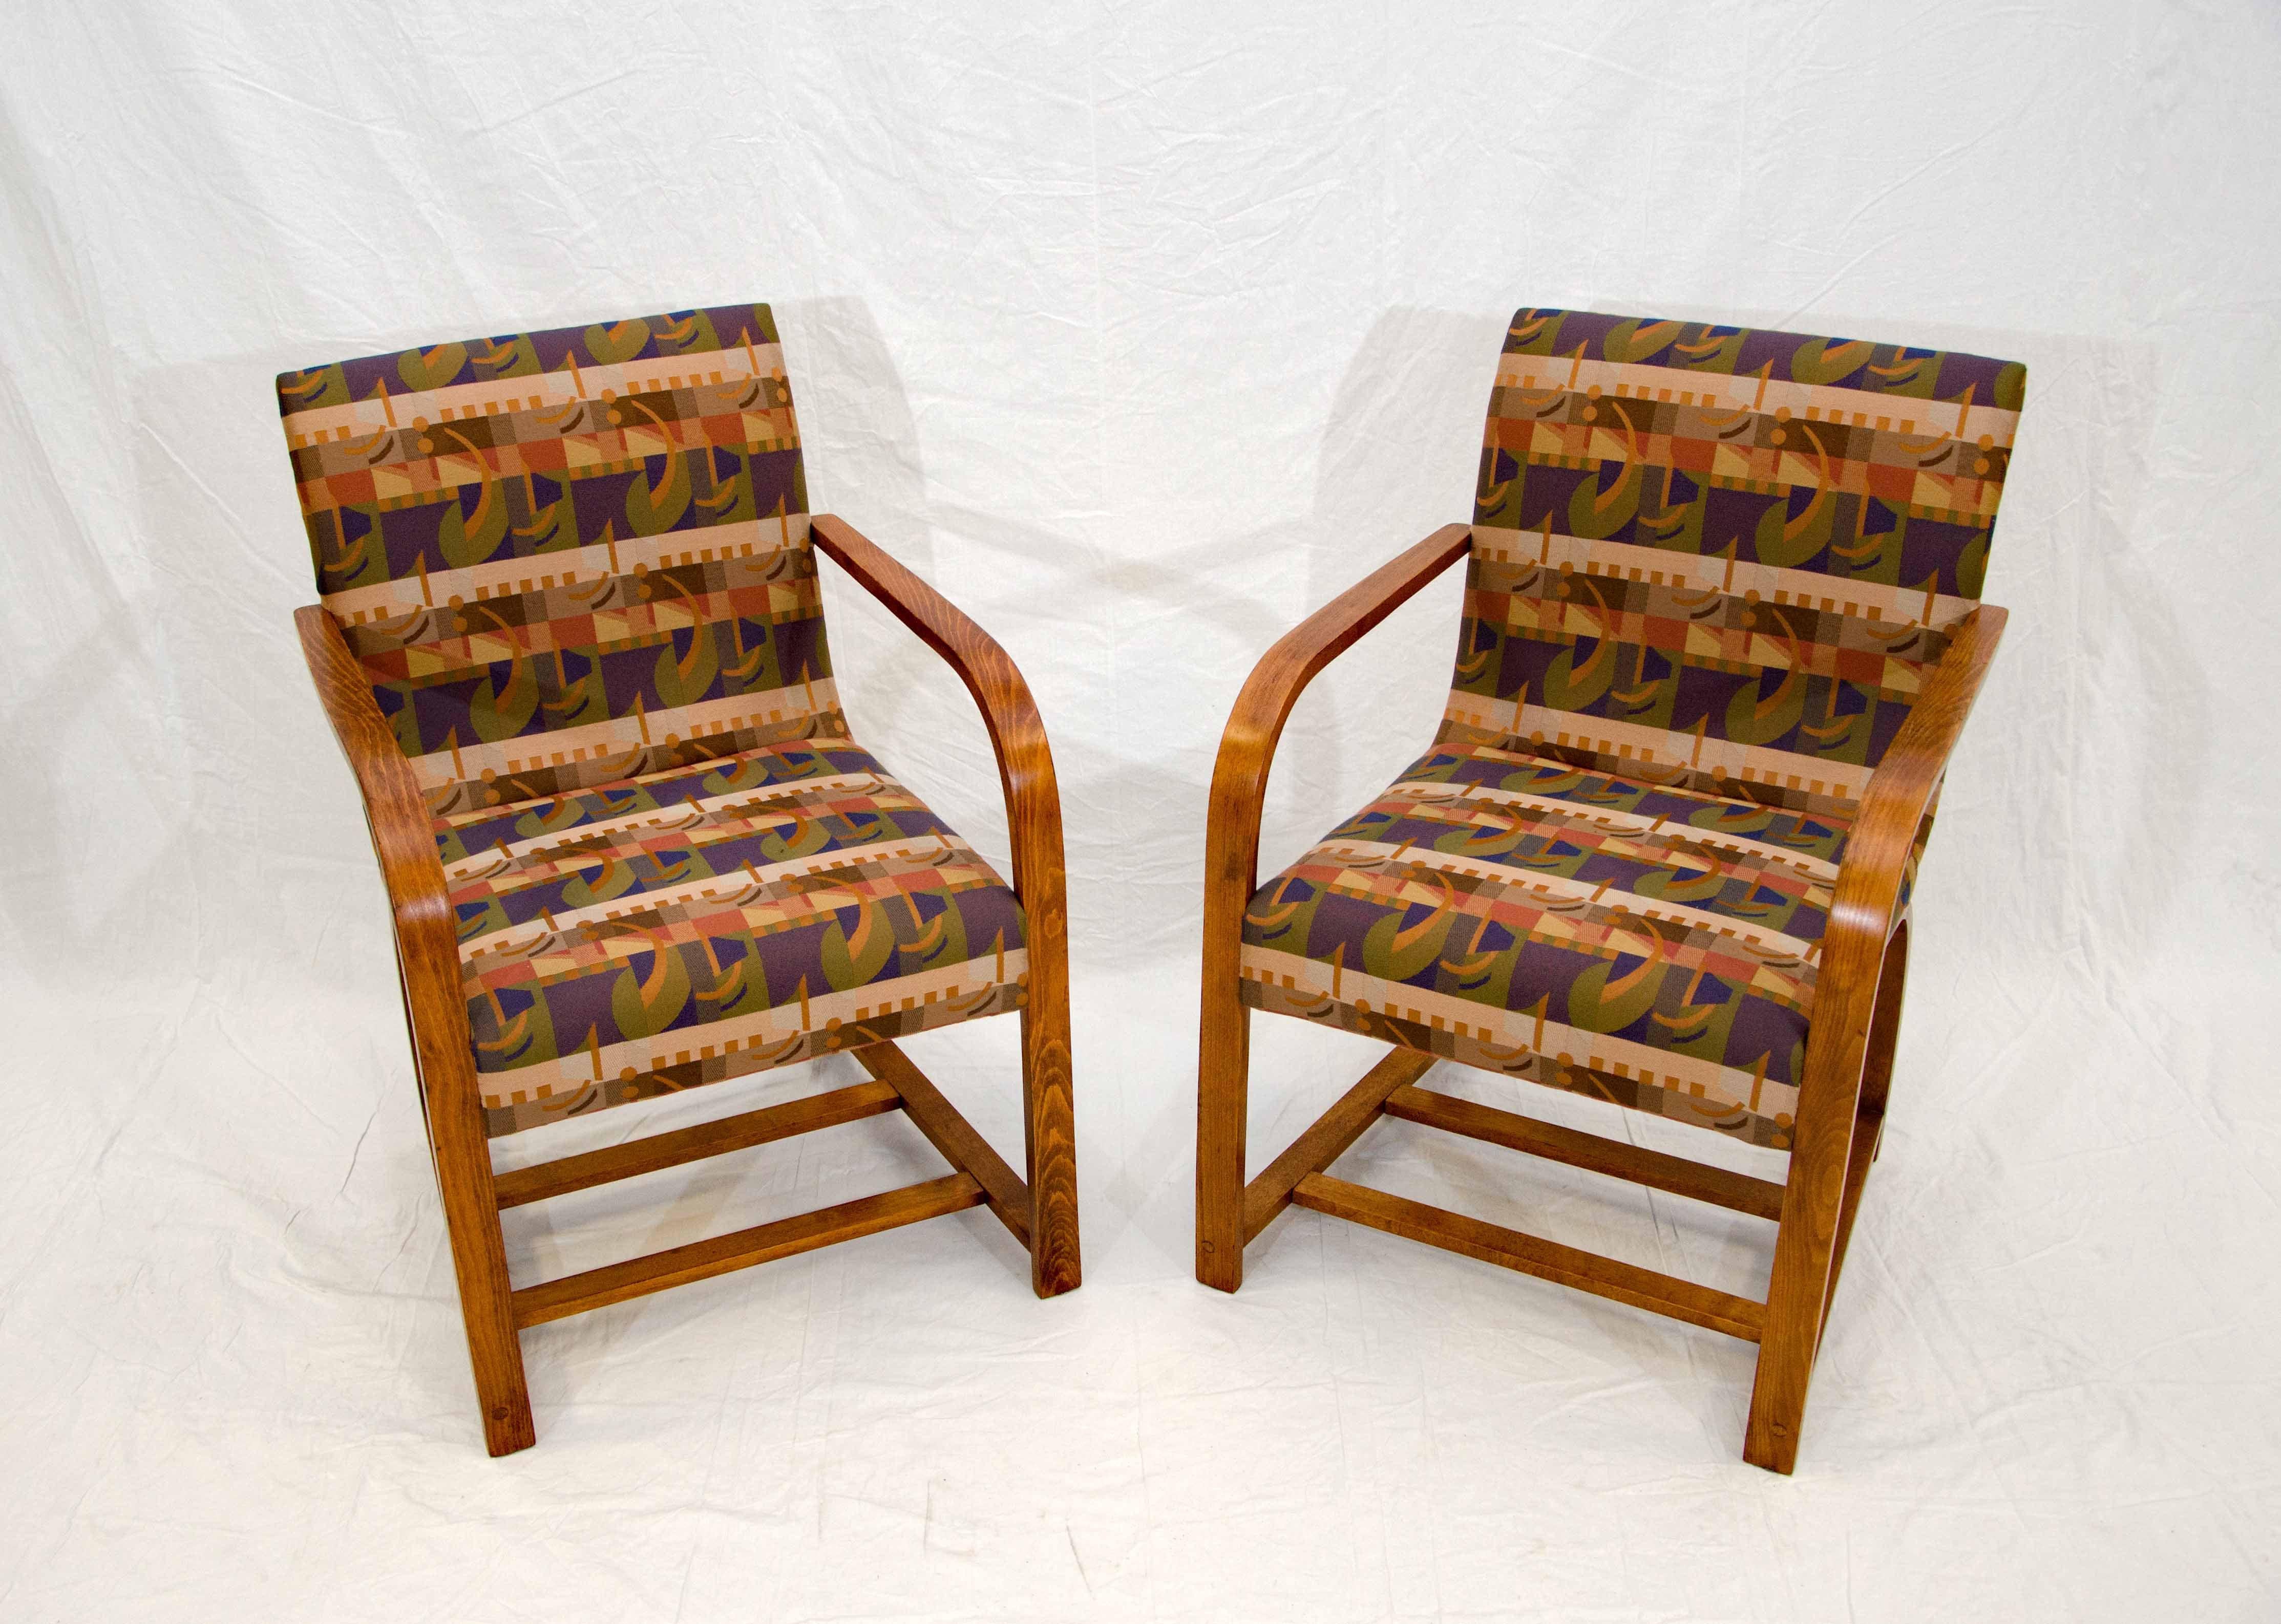 Nice pair of smaller size occasional armchairs, Model C2794 C, designed by Gilbert Rohde and manufactured 1936-1941 by the Heywood Wakefield Co. They are very comfortable with just the right slant to the back and ample seat space. They retain the